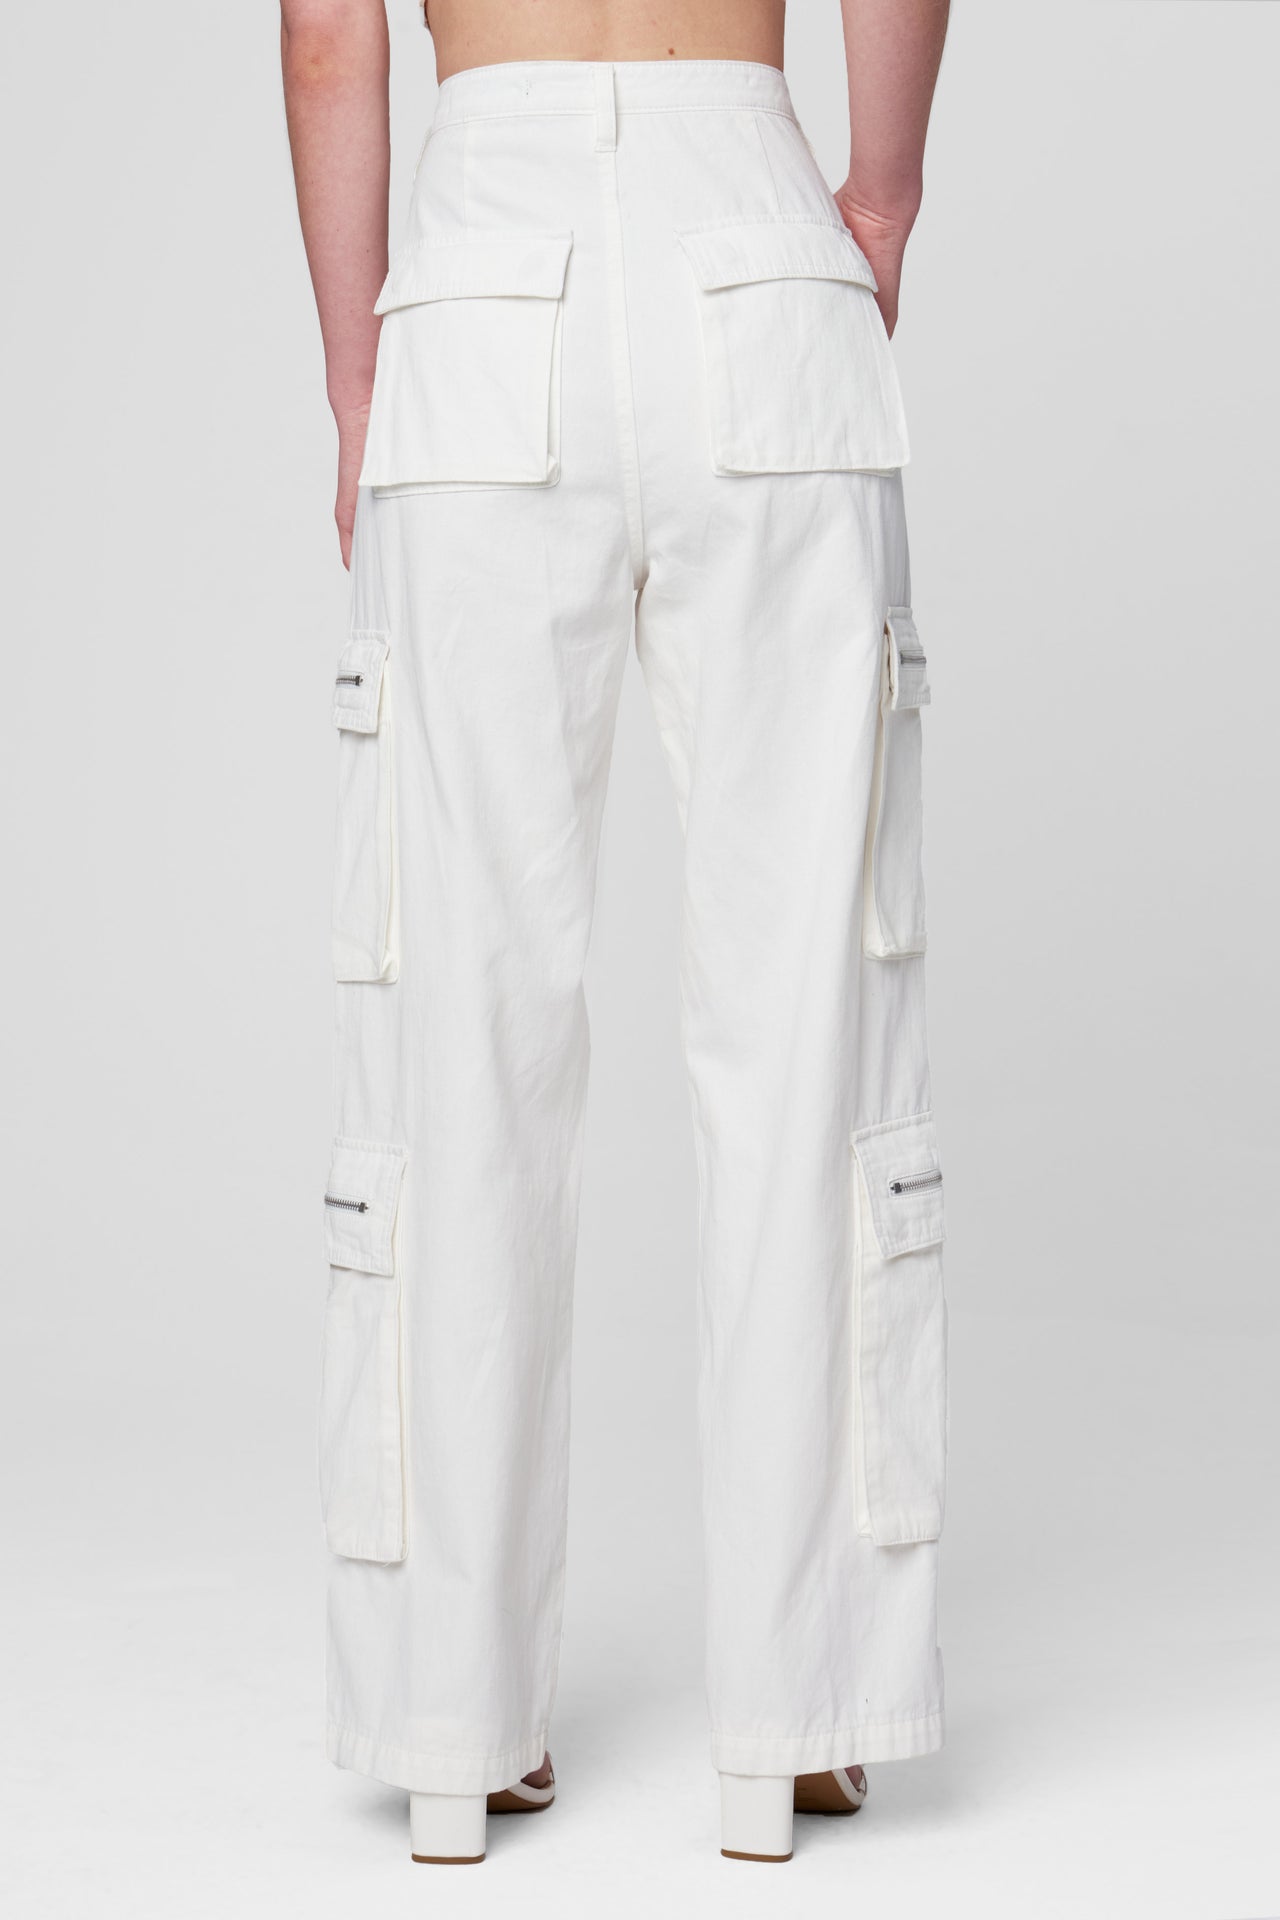 Creamy Scoop Cargo, Pant Bottom by Blank NYC | LIT Boutique